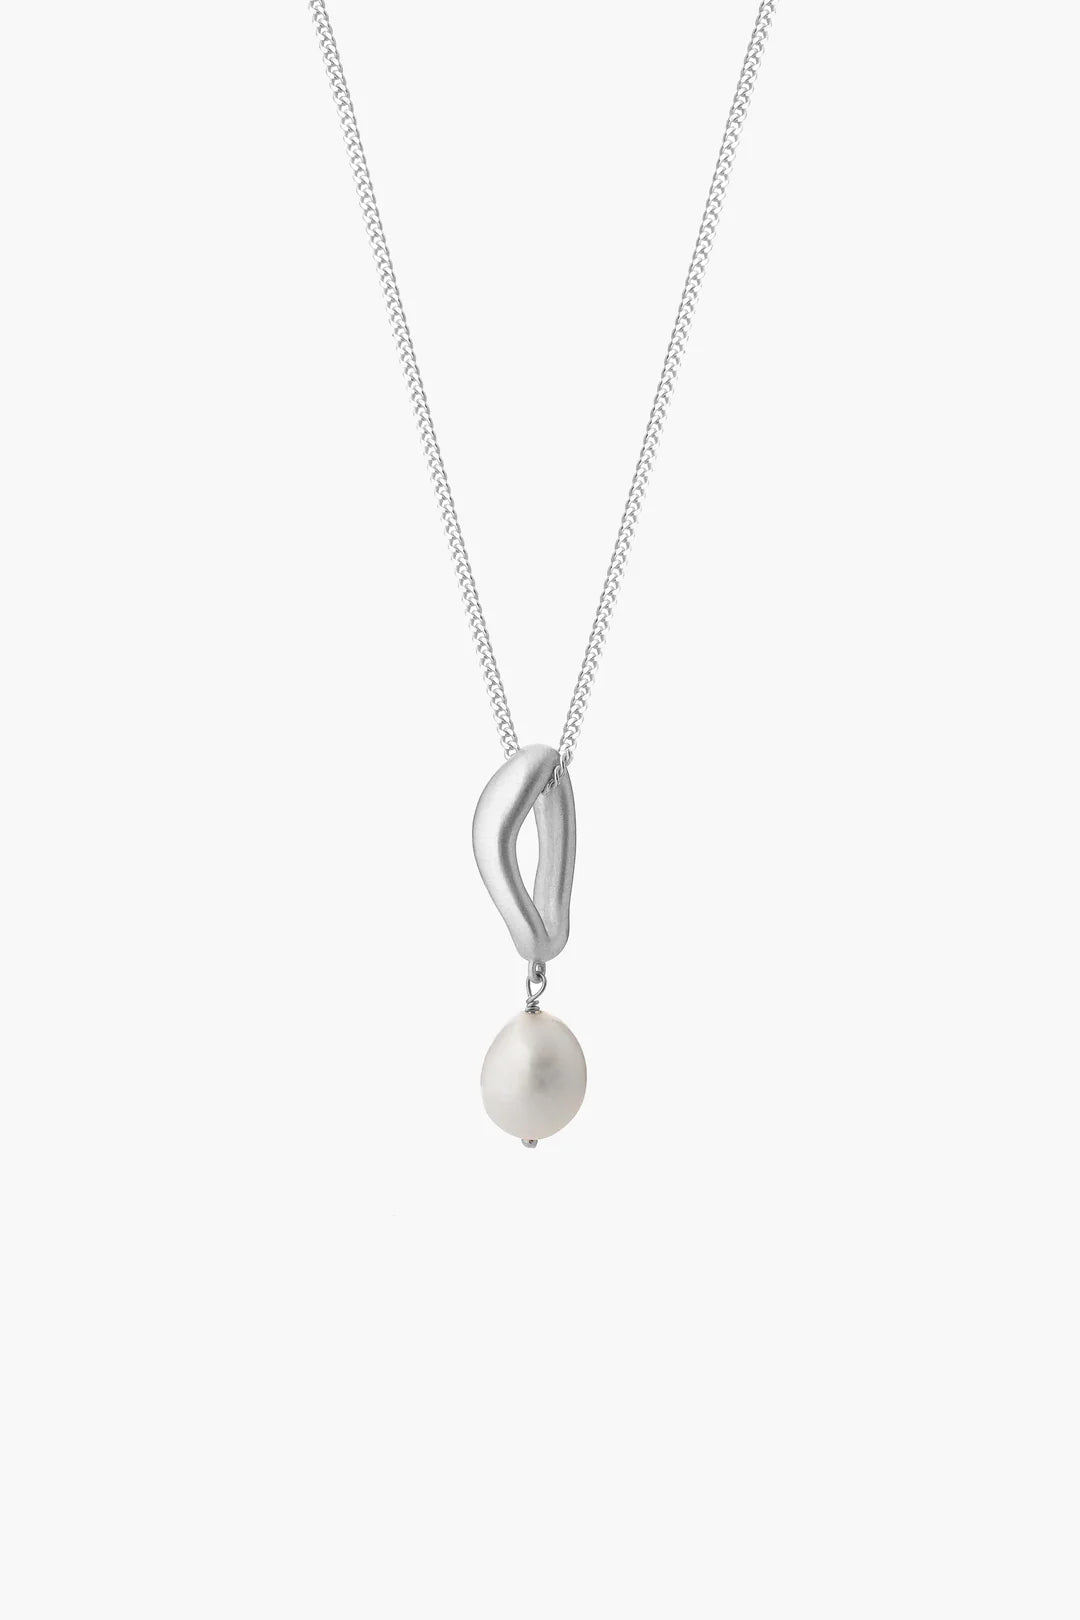 Tranquil Silver Pearl Necklace